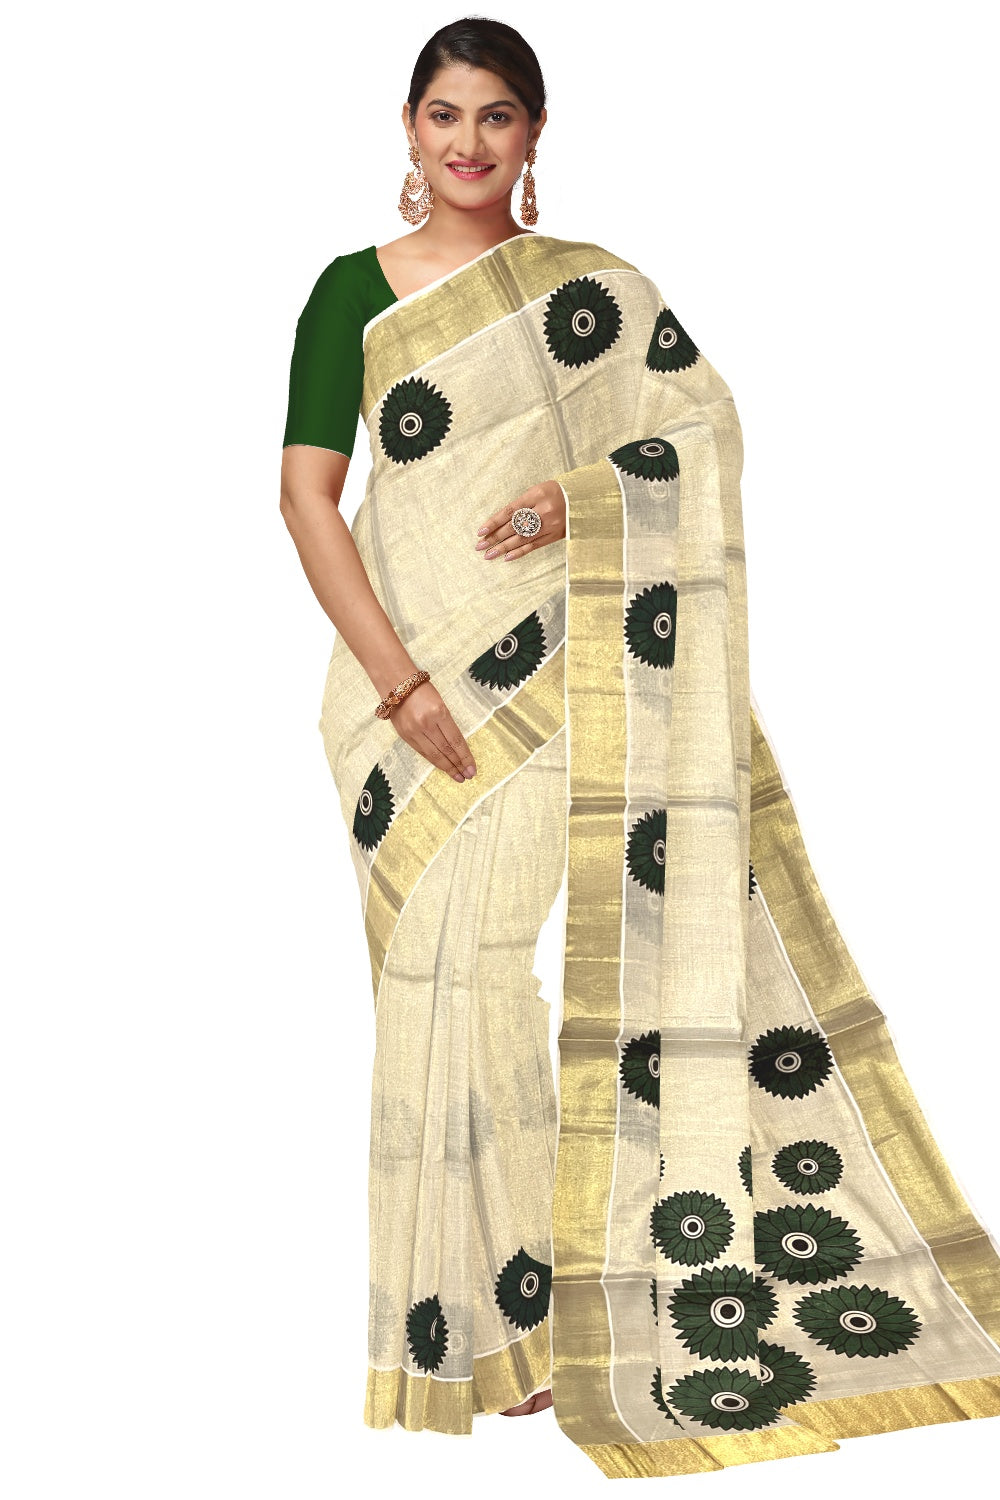 Southloom Exclusive Tissue Kasavu Saree With Green Sunflower Art On Body and Pallu